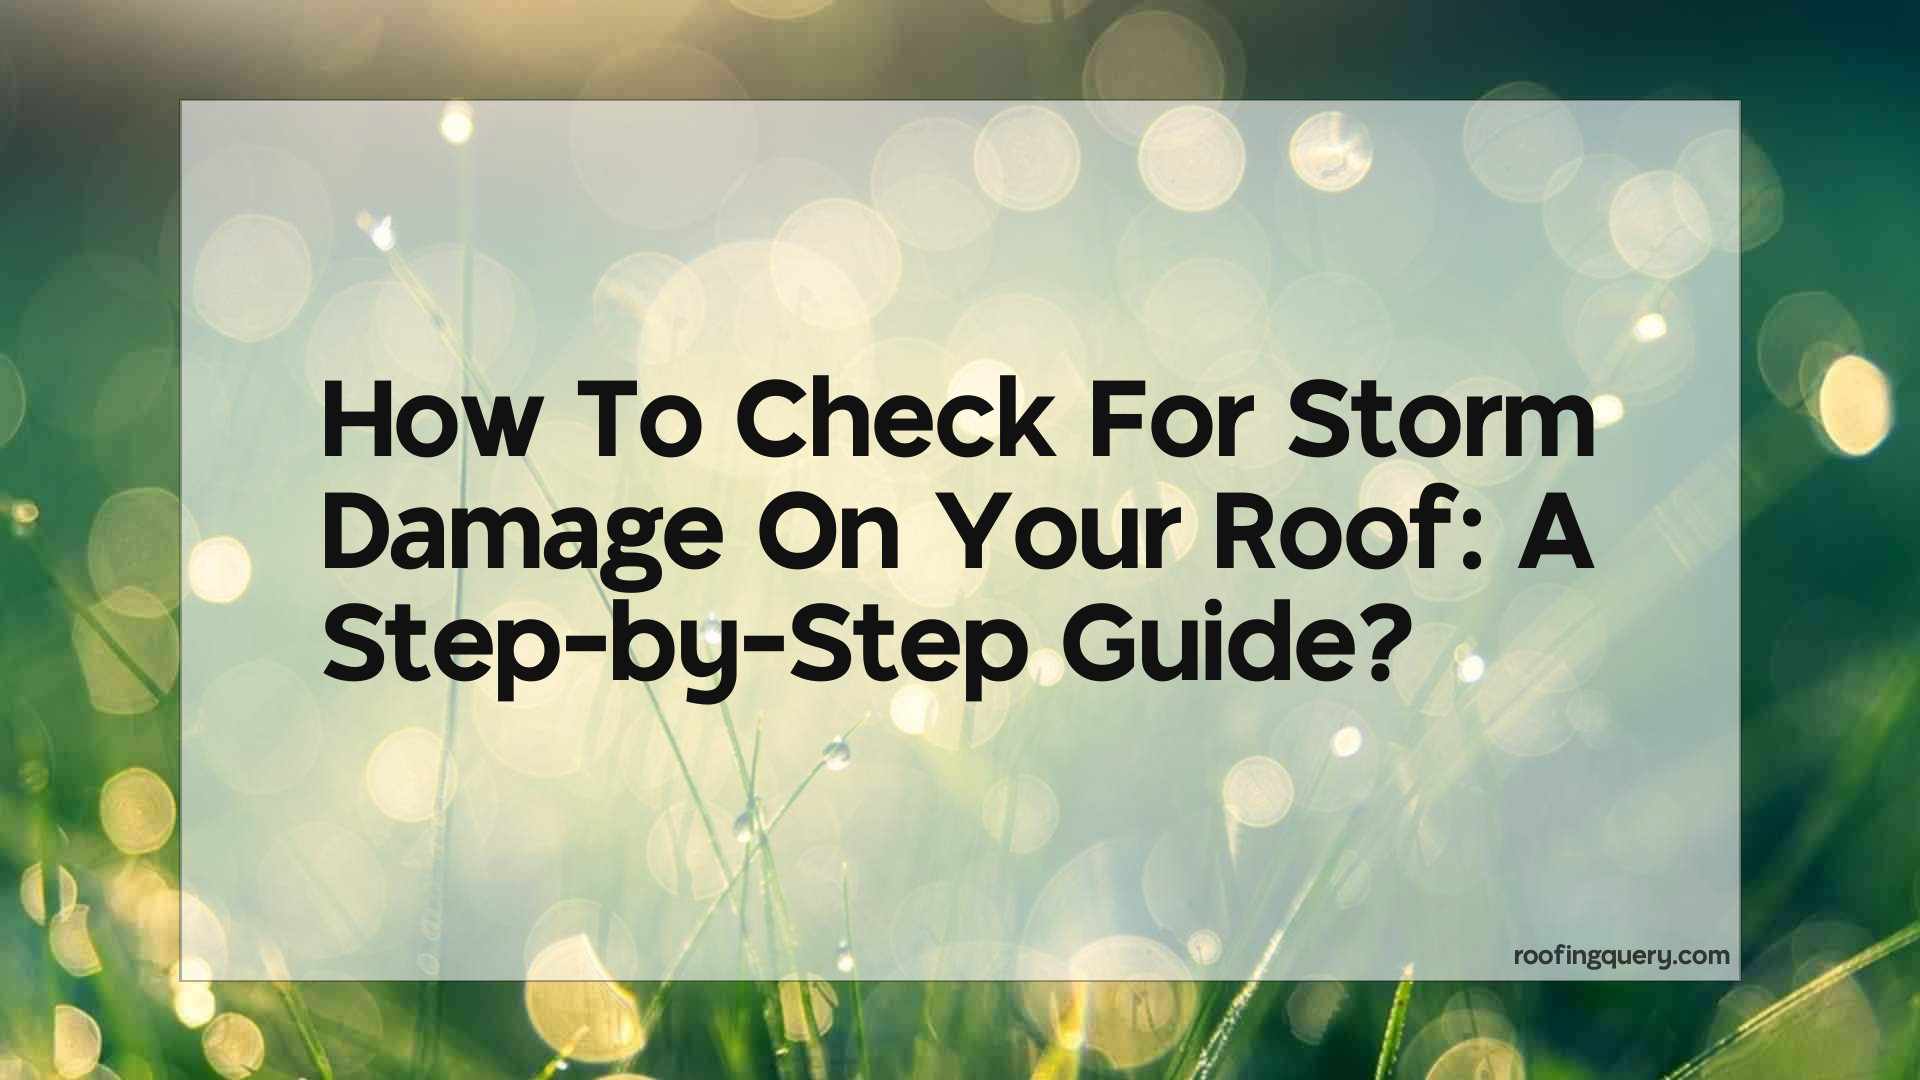 How To Check For Storm Damage On Your Roof: A Step-By-Step Guide